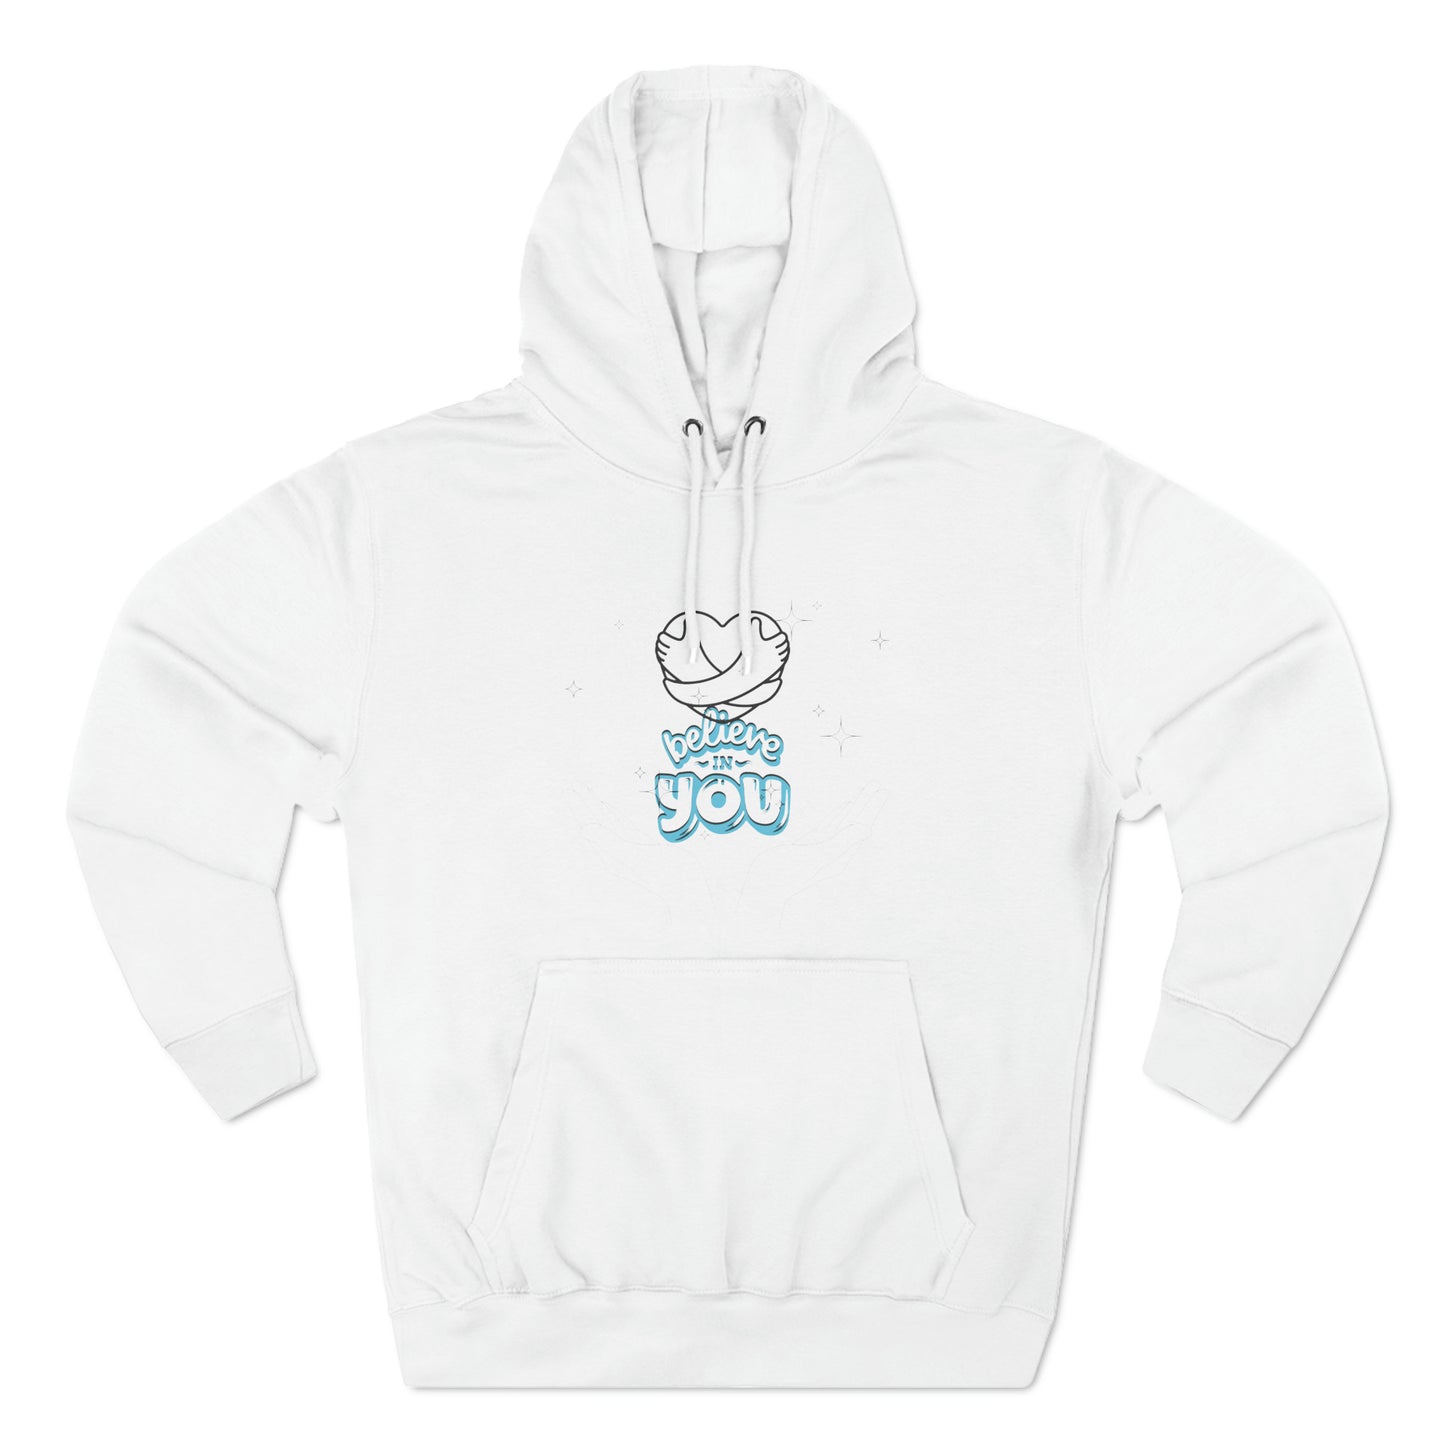 I Believe In You" Unisex Premium Pullover Hoodie - Embrace Cozy Comfort in Style